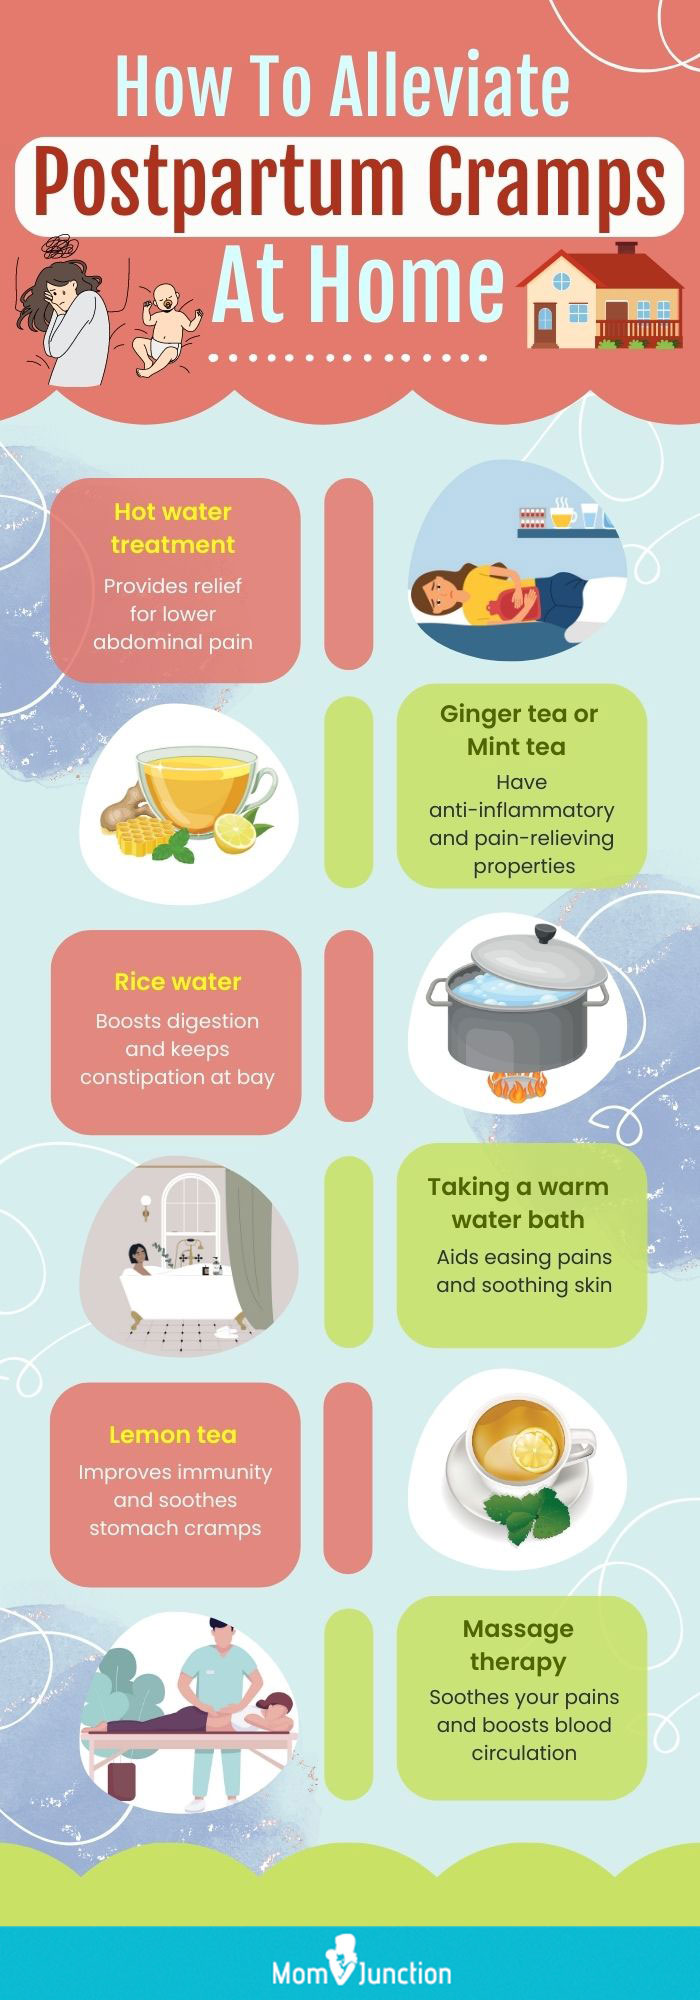 how to alleviate postpartum cramps at home (infographic)